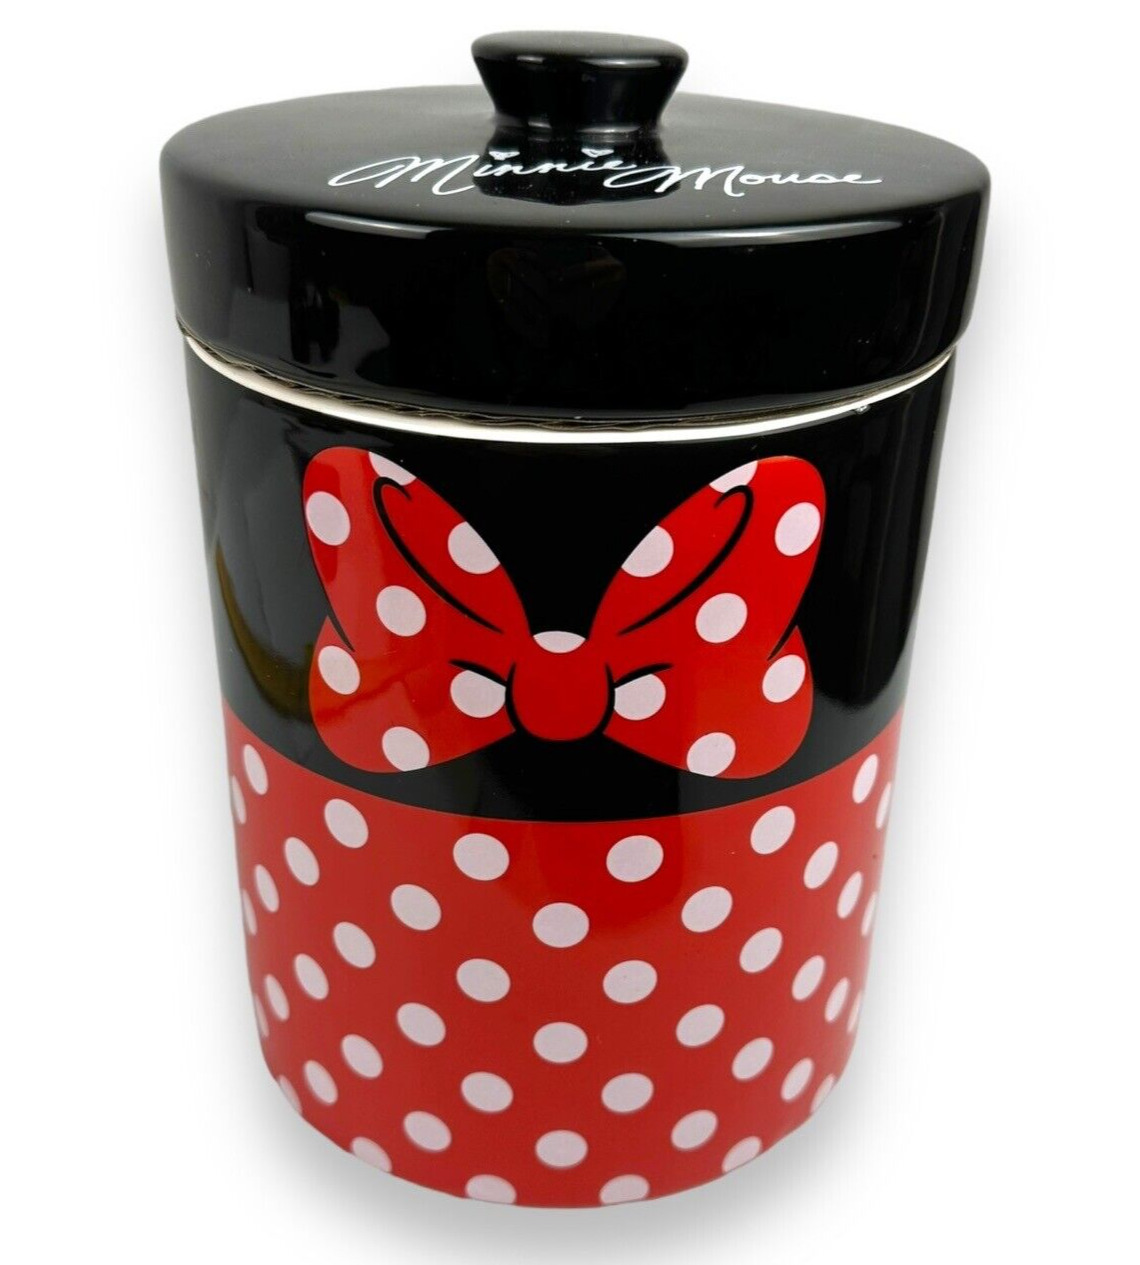 Minnie Mouse Ceramic Cookie Jar Canister with Lid Red Polka Dot Bow Disney Parks